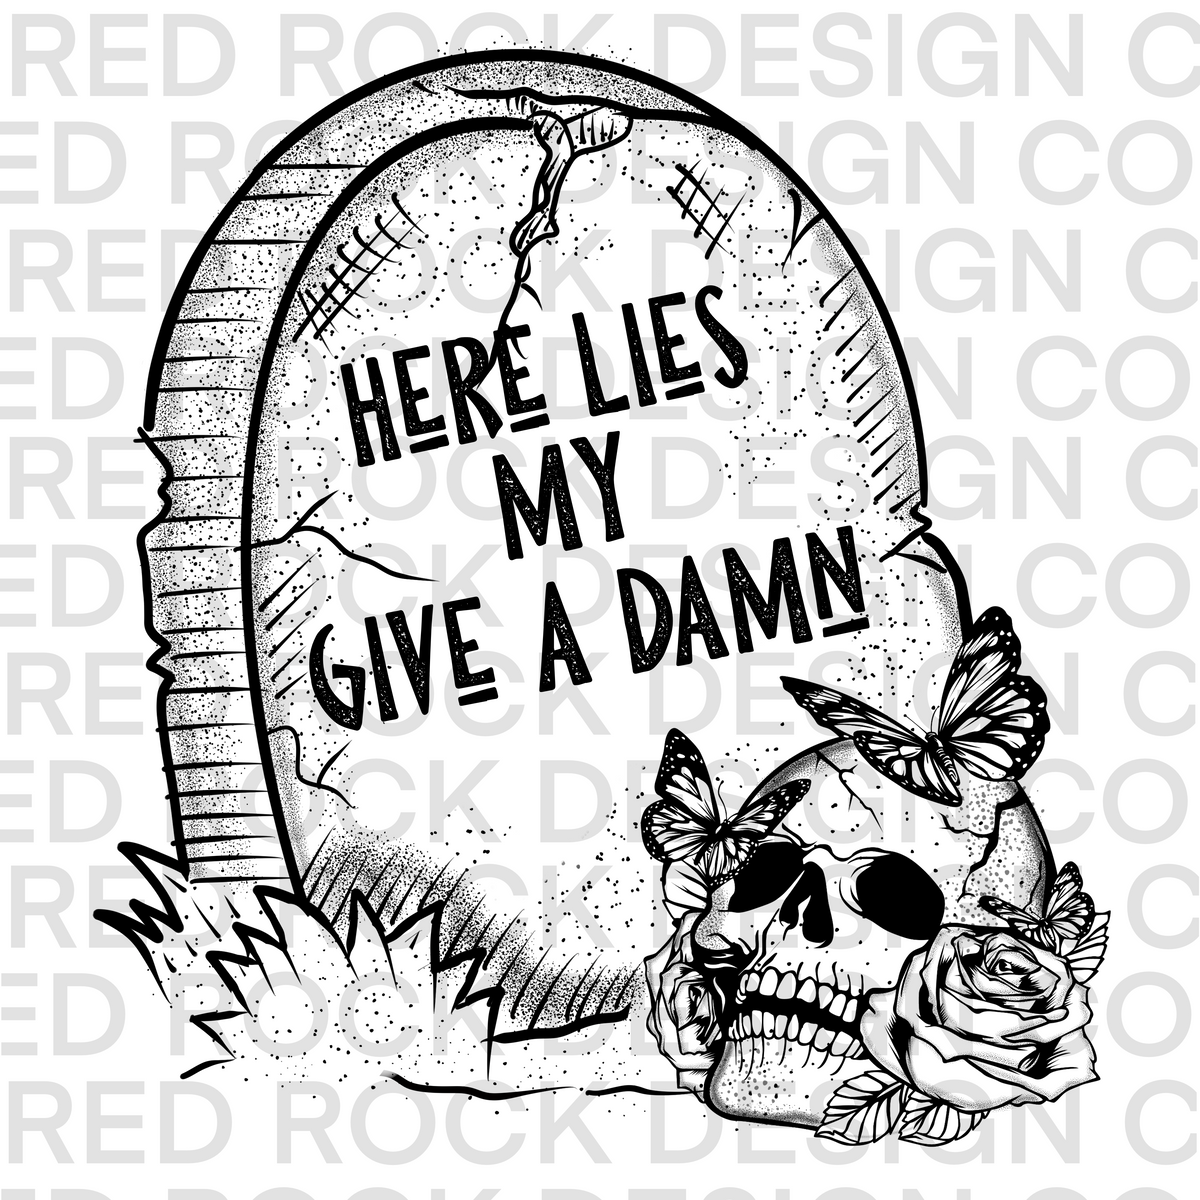 Here Lies My Give A Damn Exclusive Design Dd – Red Rock Design Co